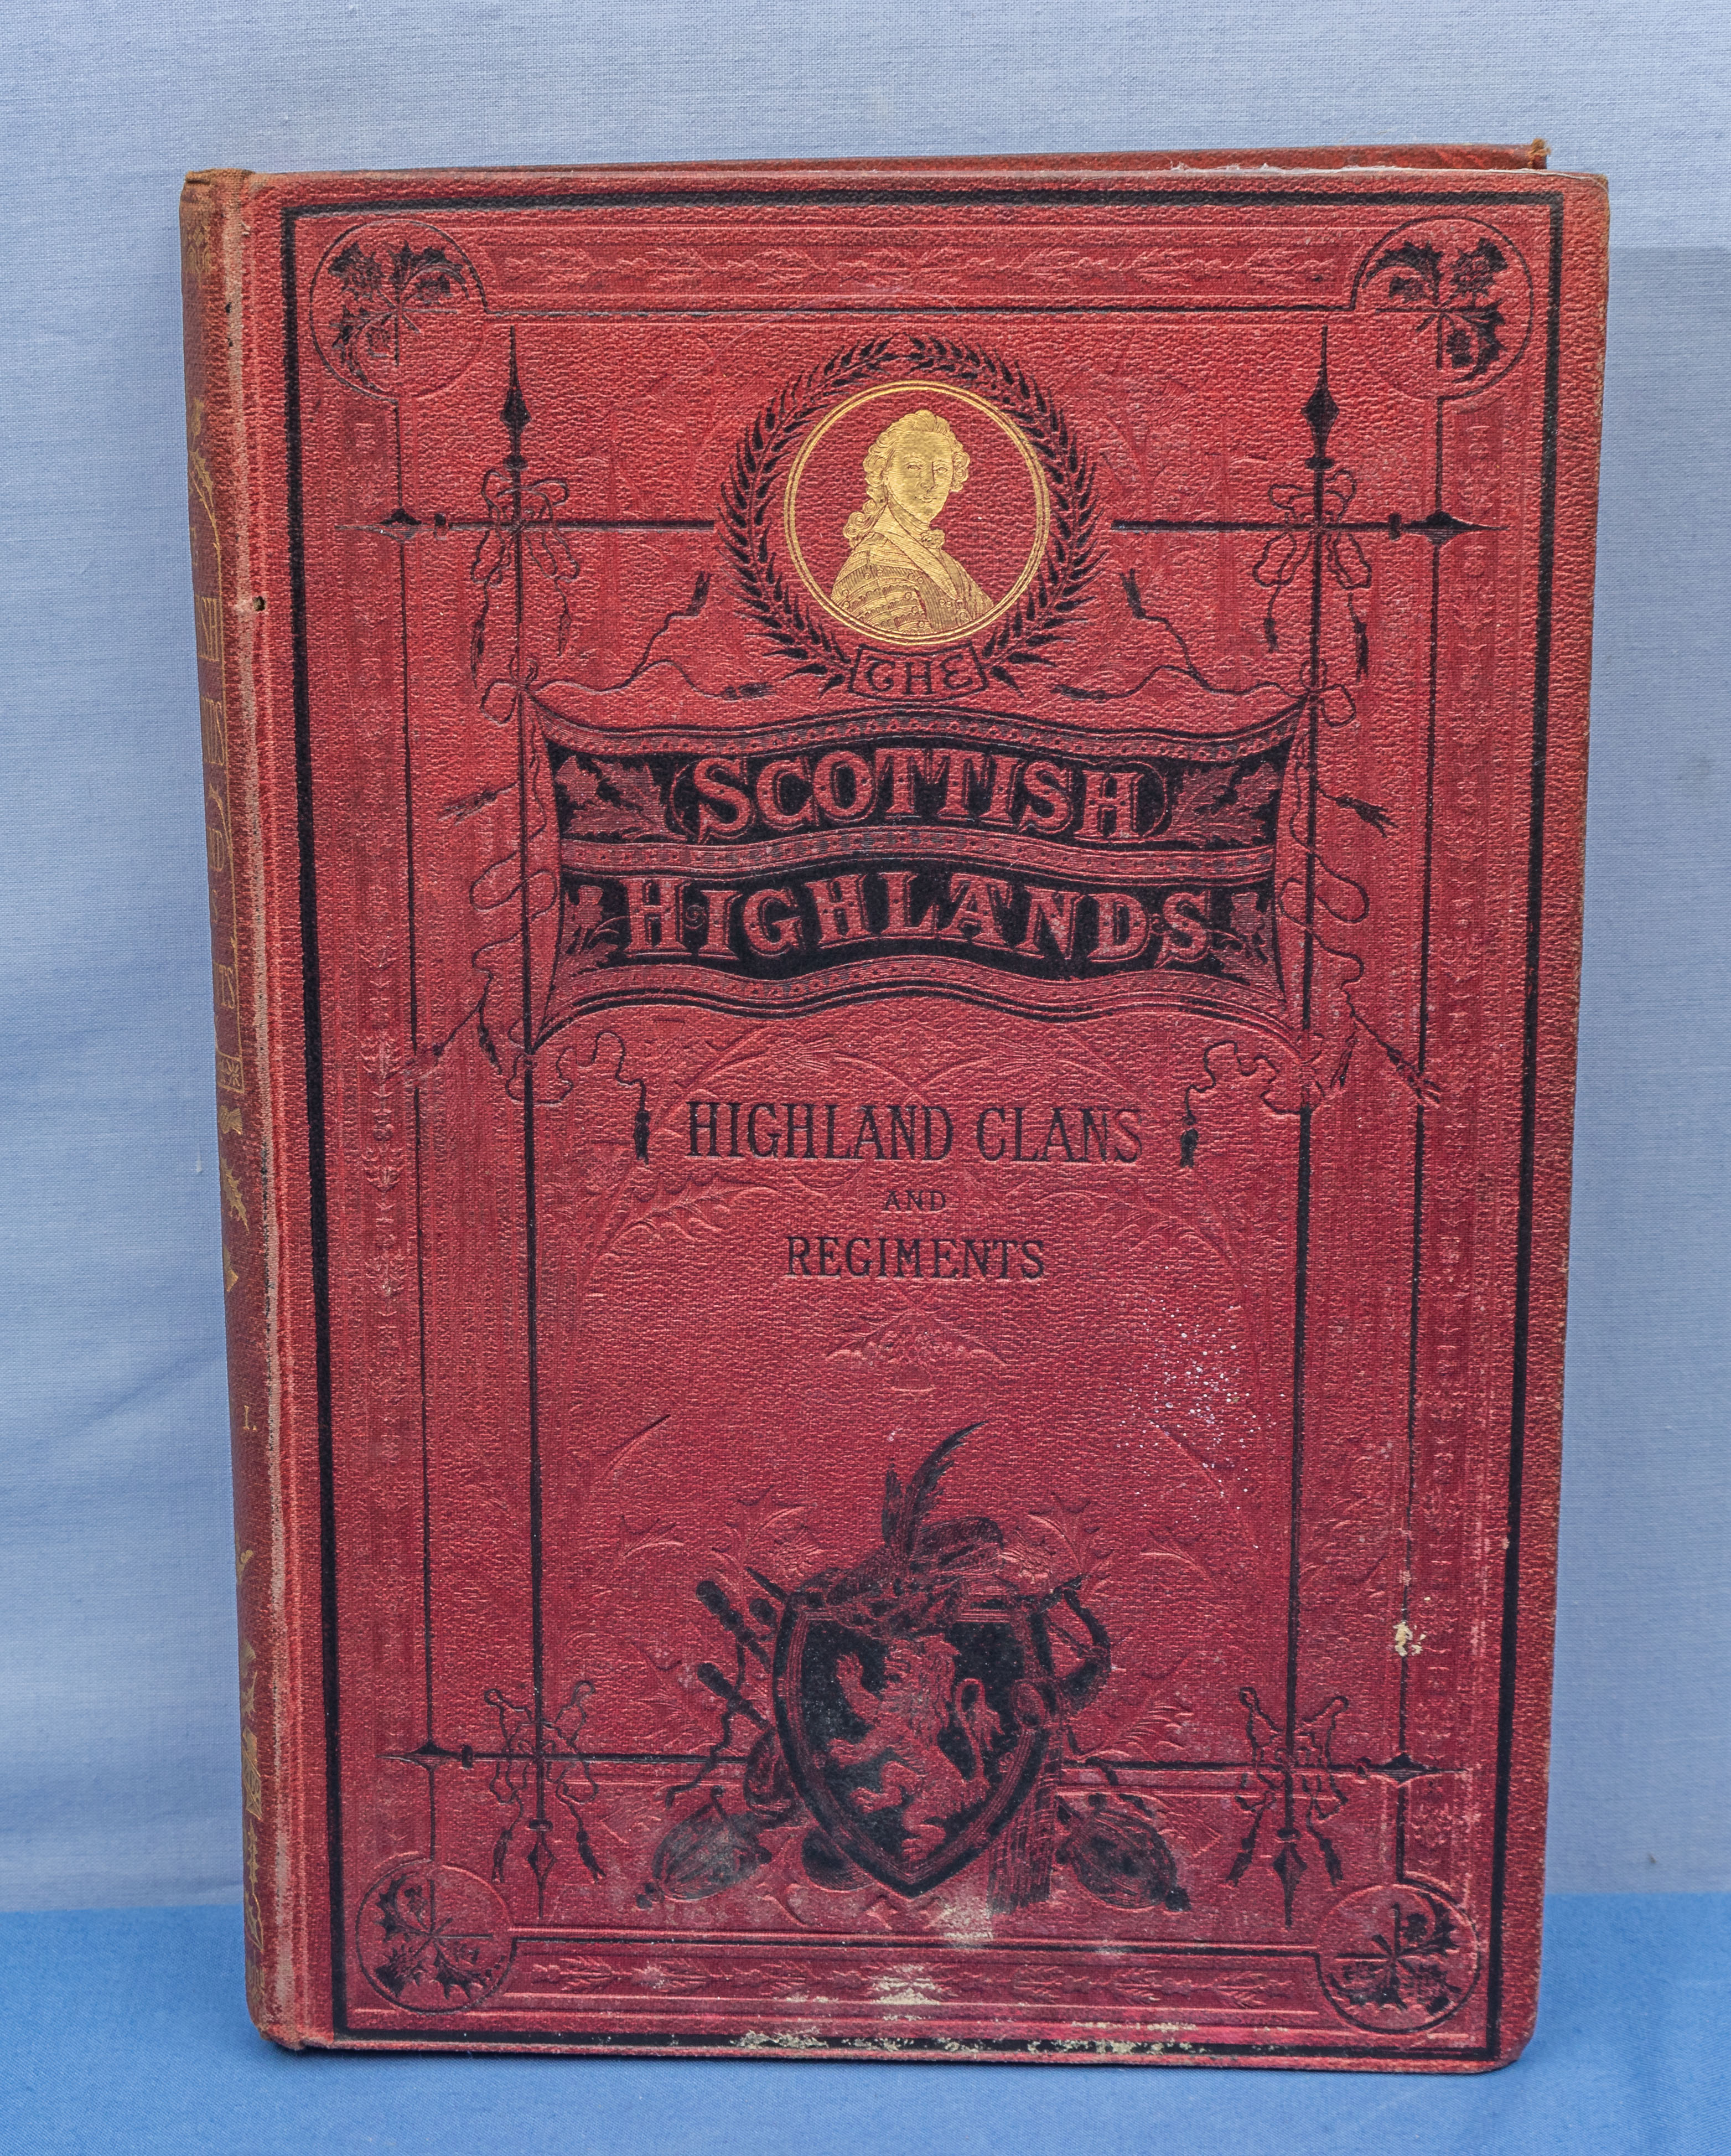 Eight volumes of Highland Clans and Highland Regiments edited by John S Keltie FSAS published by A - Image 2 of 3